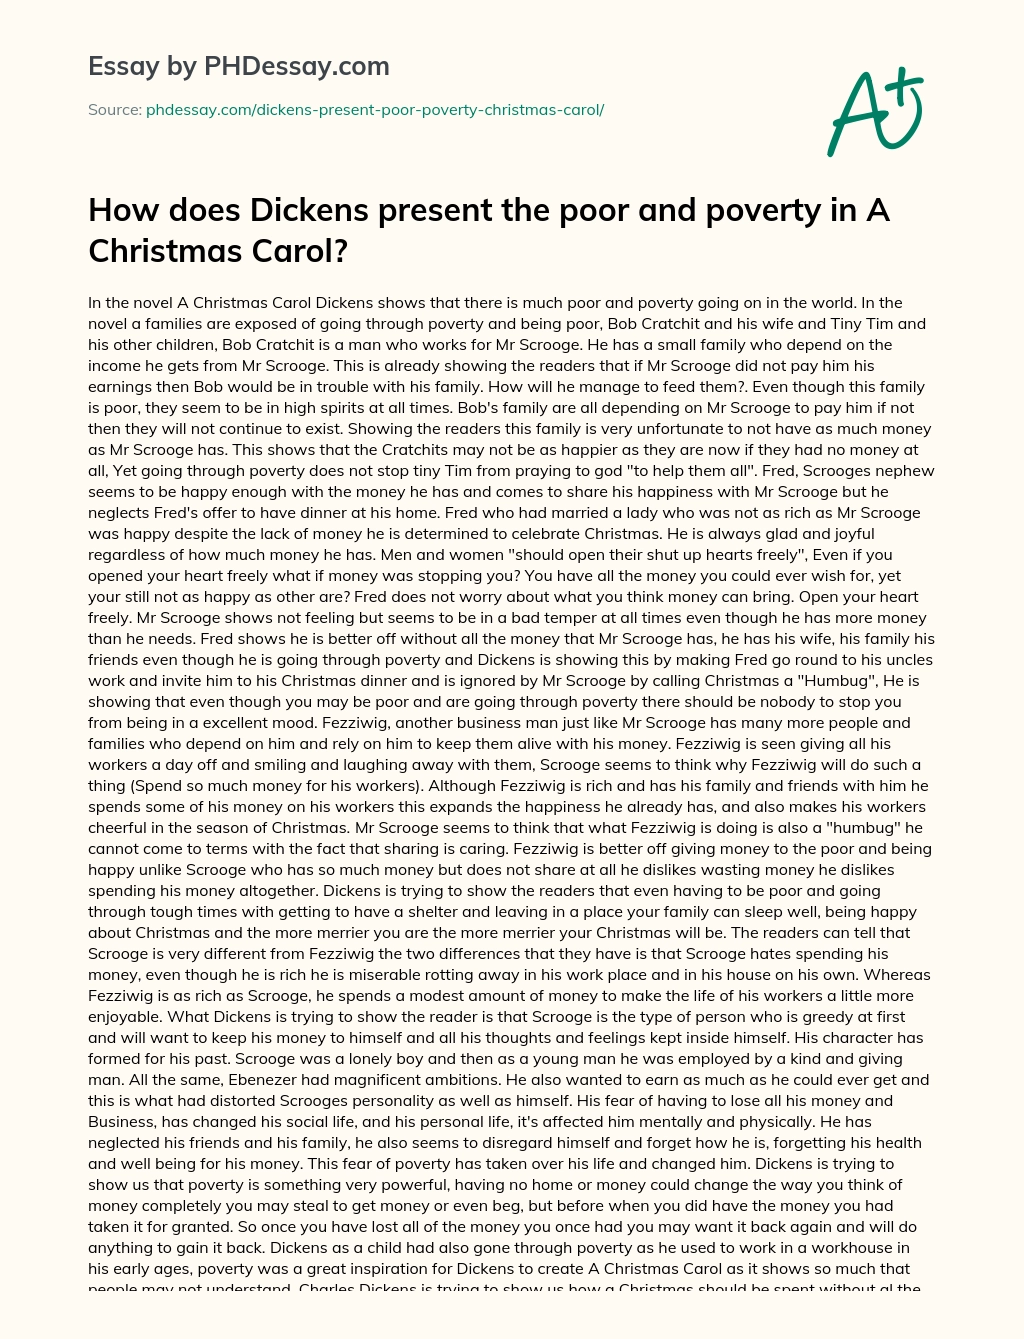 how is poverty presented in a christmas carol essay